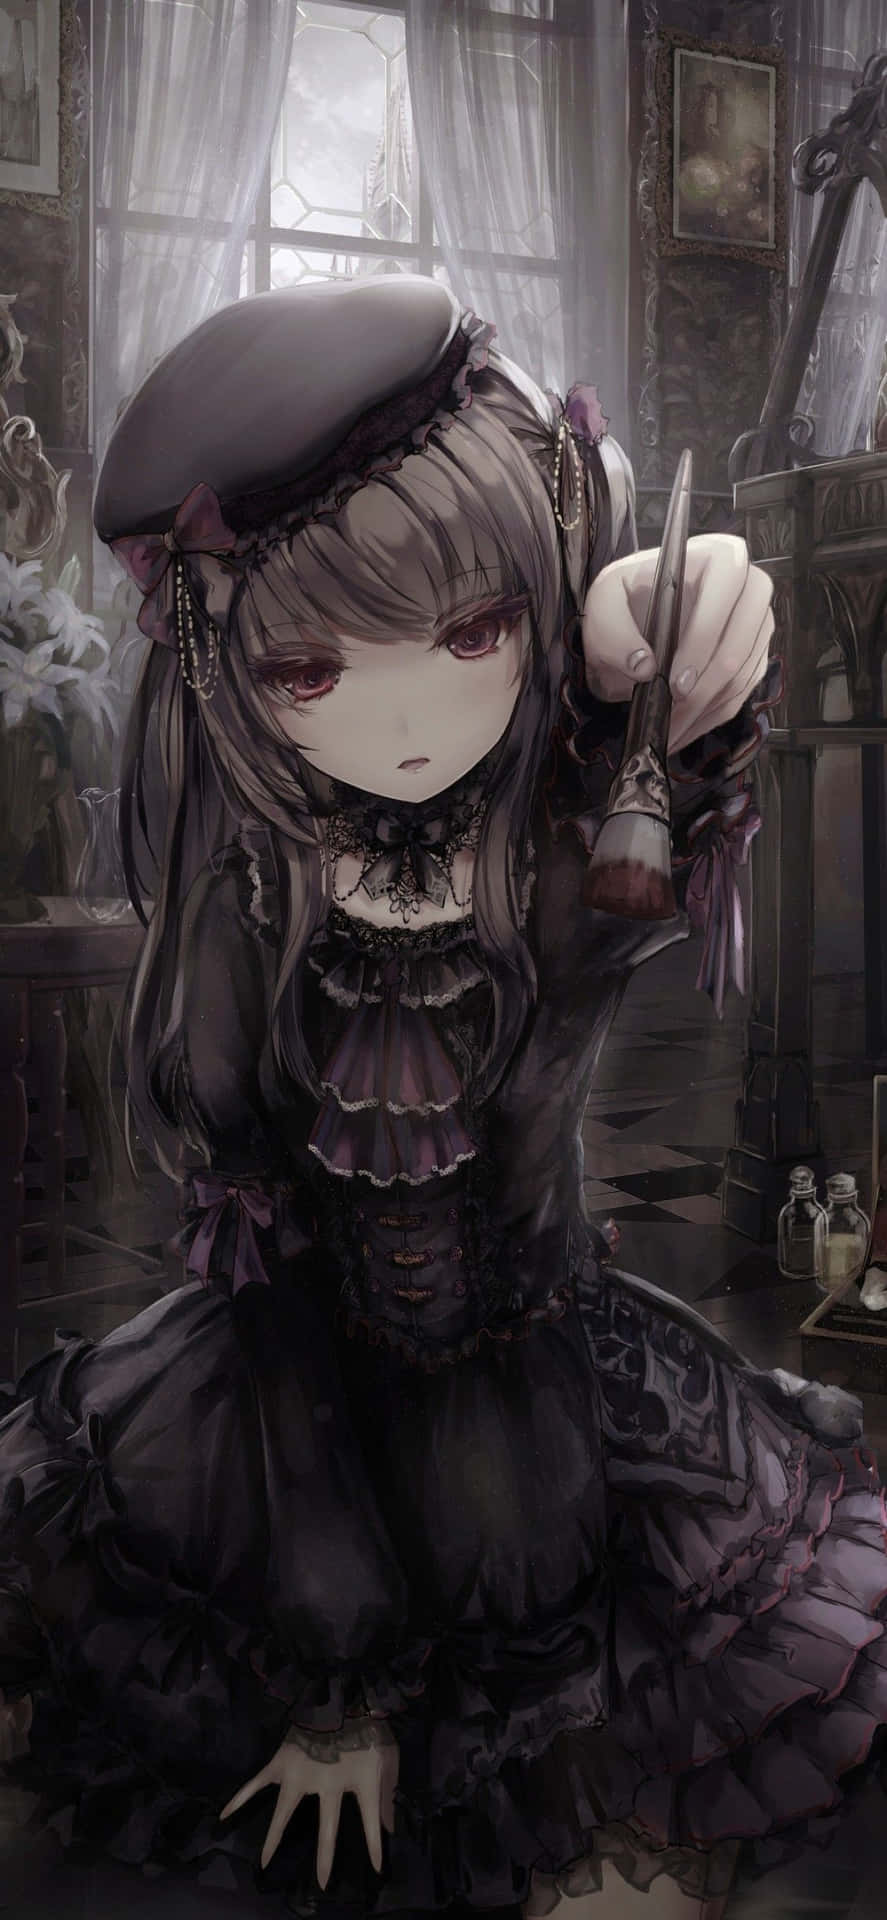 Cool Gothic Anime Iphone Screen Theme Wallpaper